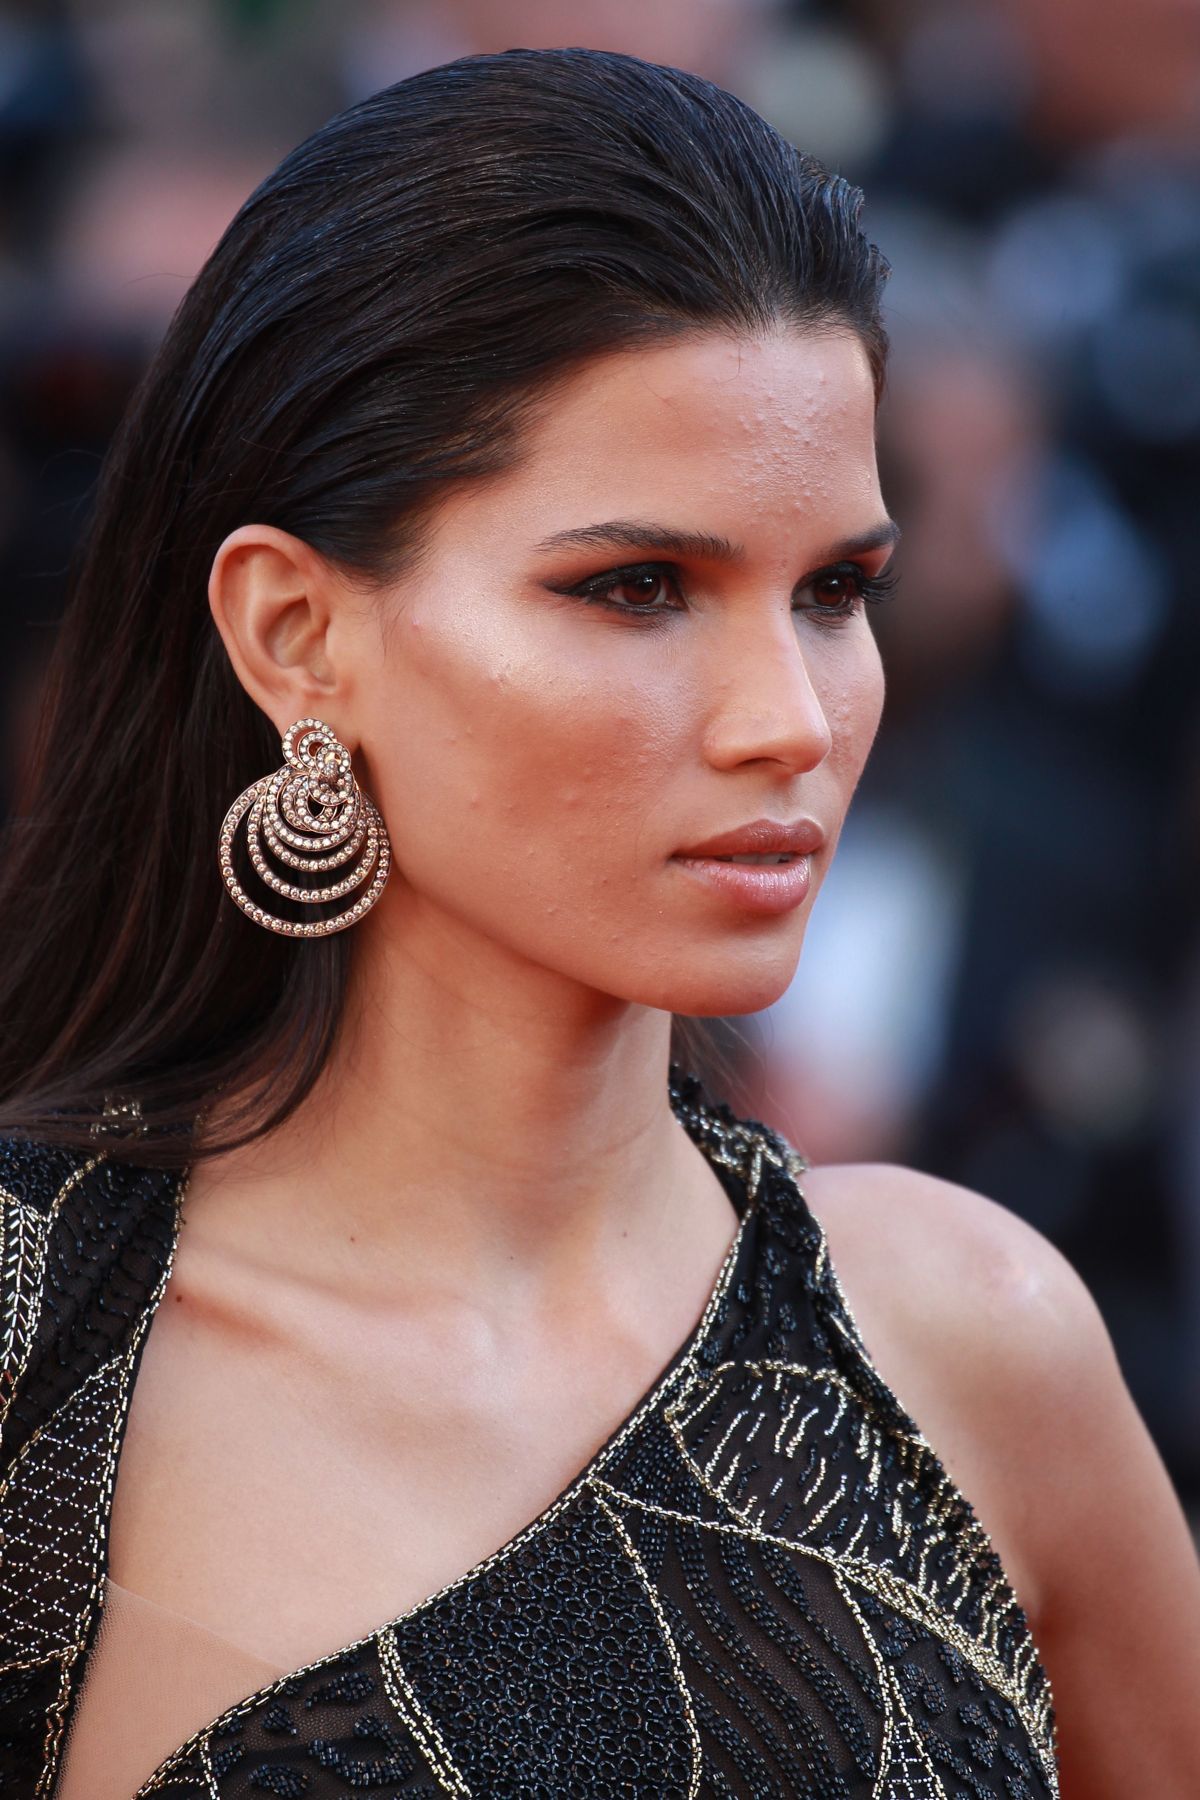 raica-oliveira-at-girls-of-the-sun-premiere-at-cannes-film-festival-05-12-2018-7.jpg